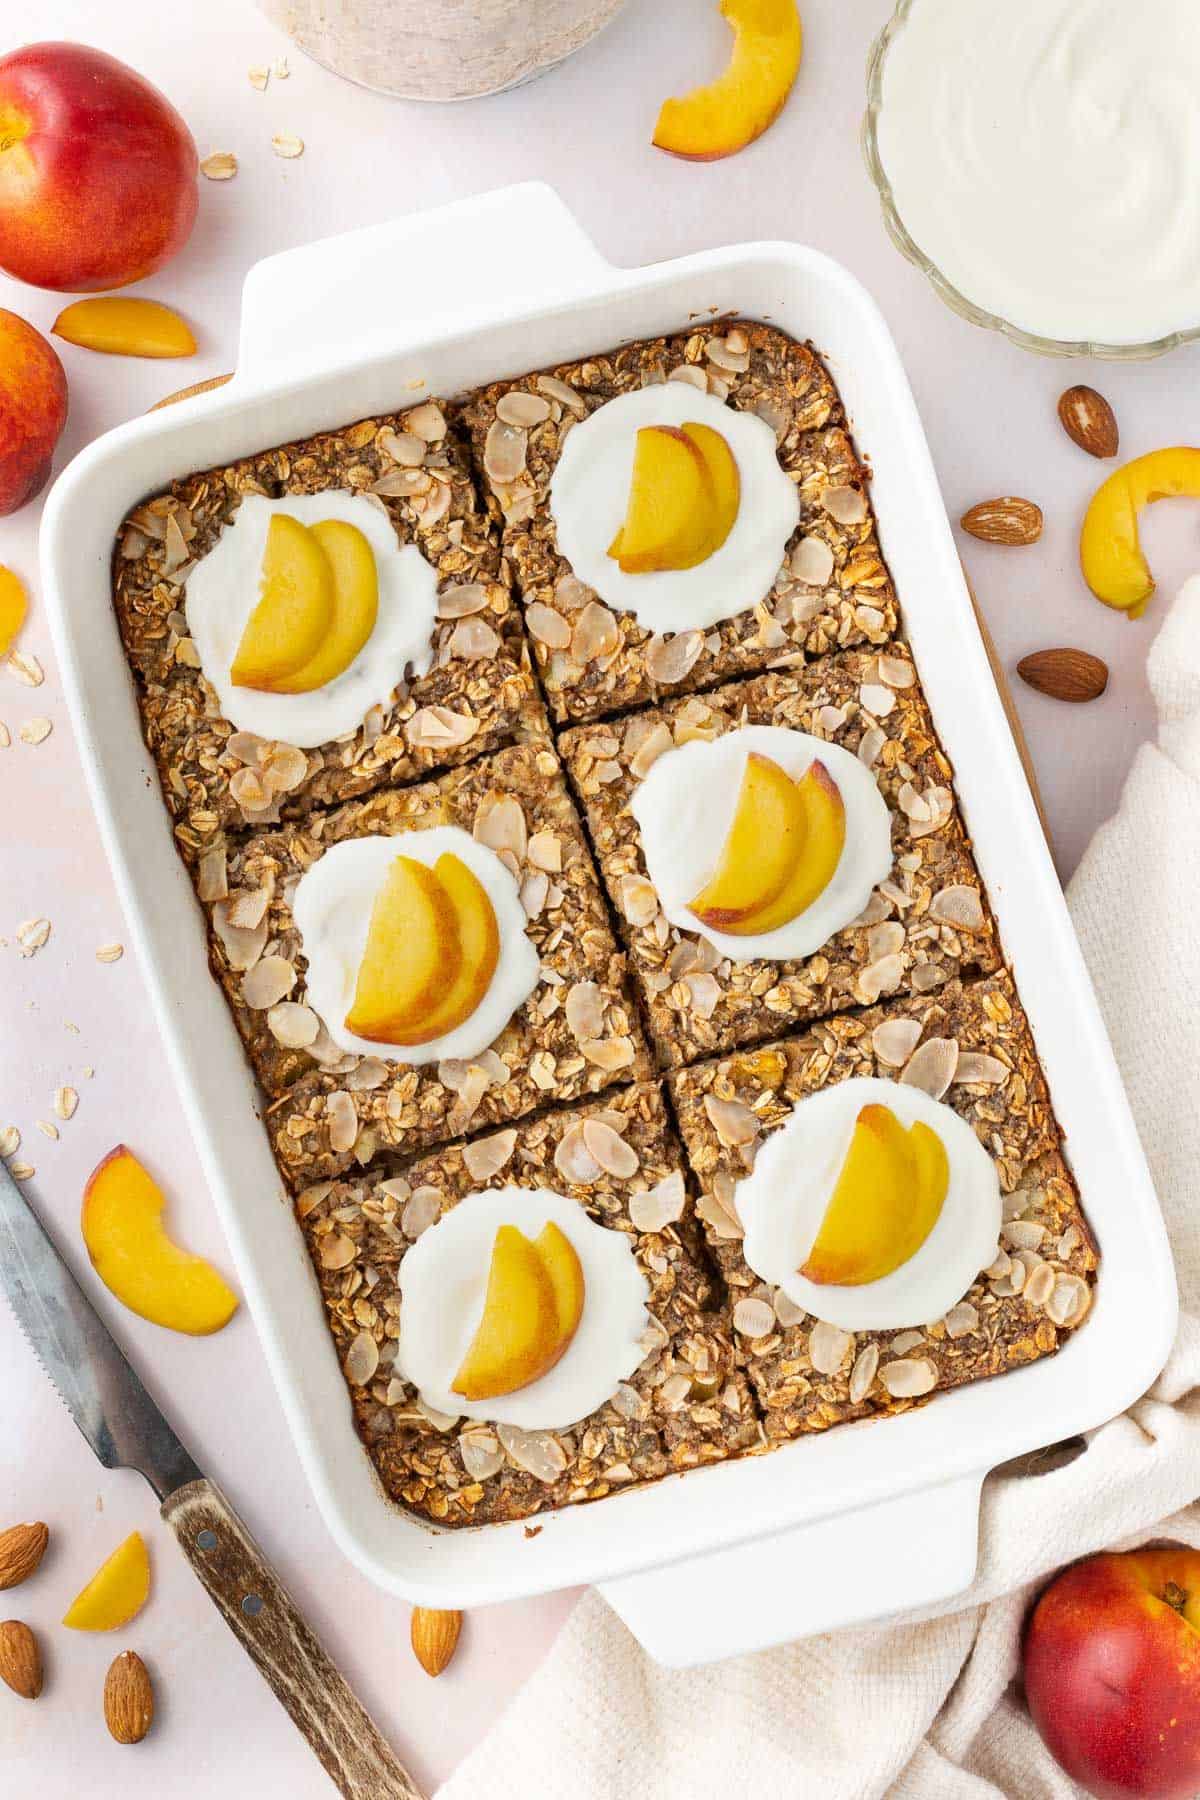 White rectangular dish of baked peach oatmeal, cut into six pieces and topped with yoghurt and peach slices.